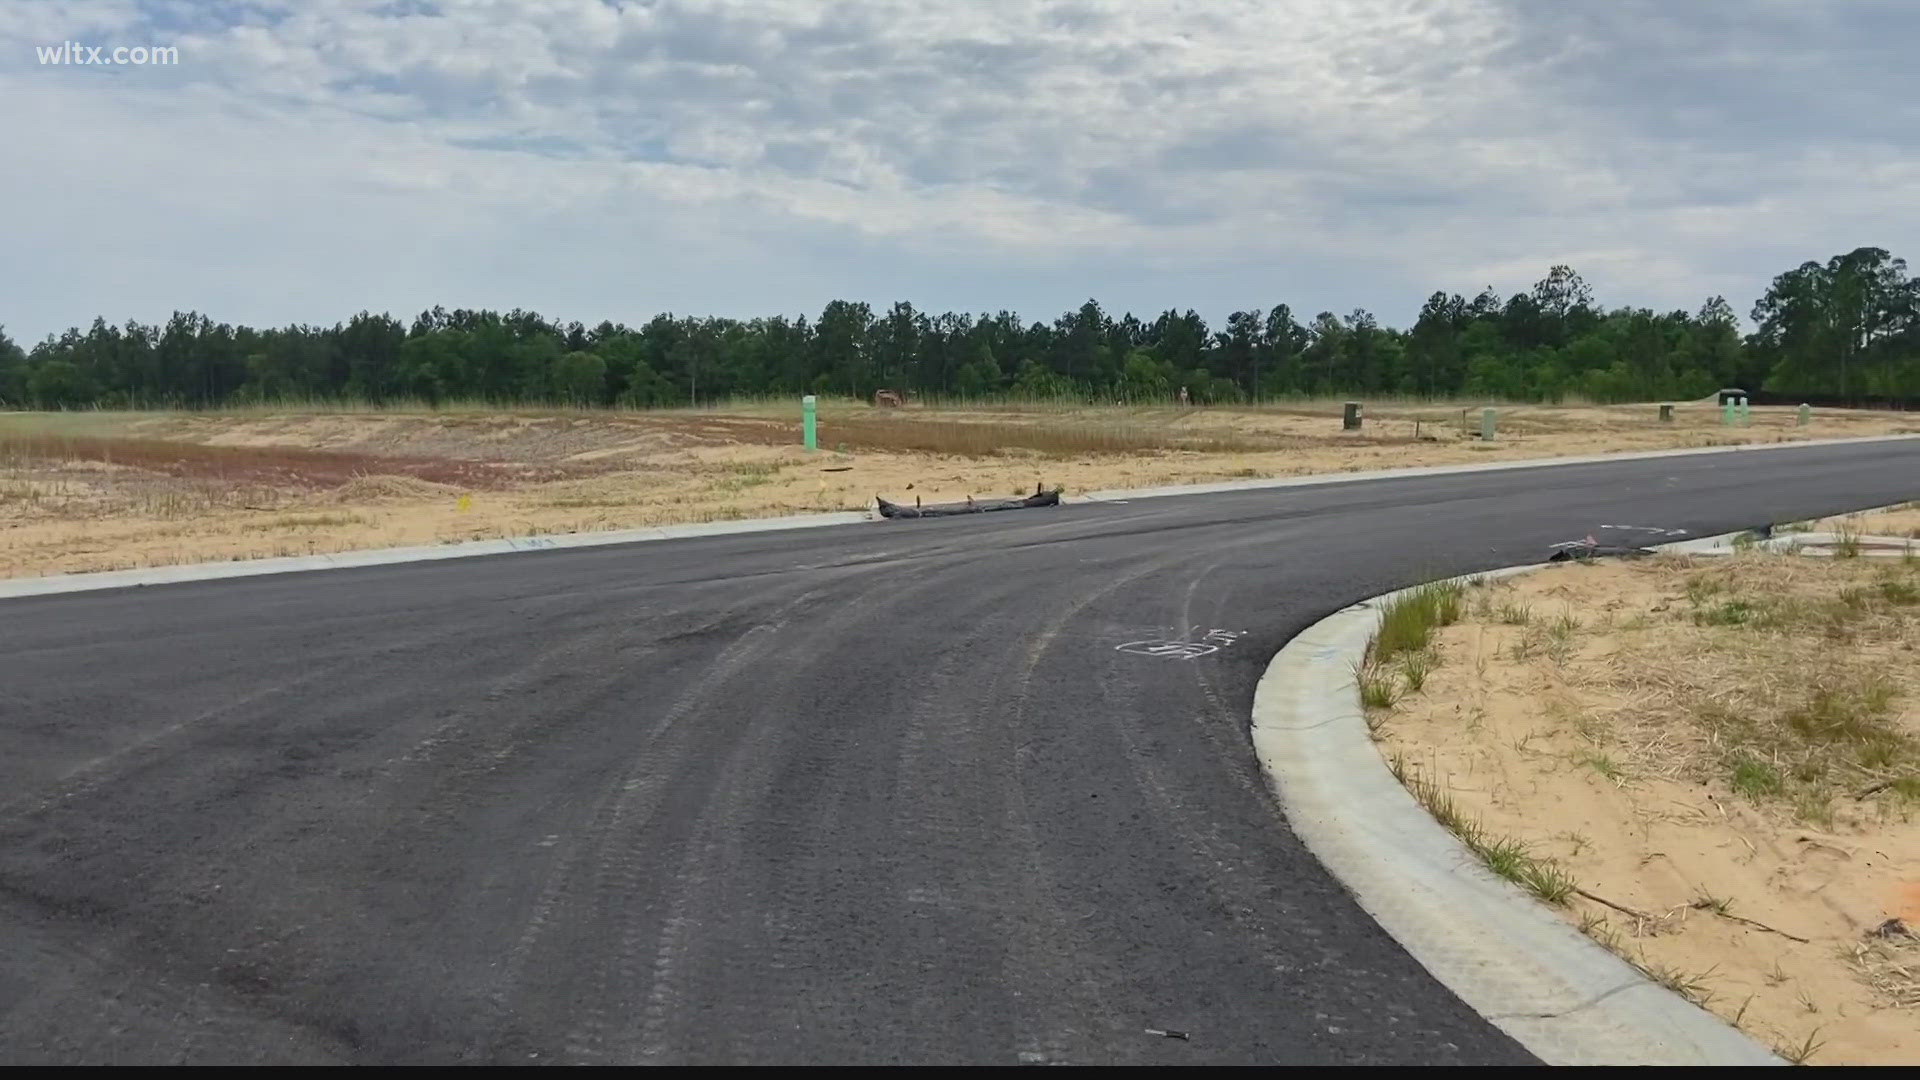 The county first expanded the lot sizes for homes to a third of an acre, now they are taking it a step further.